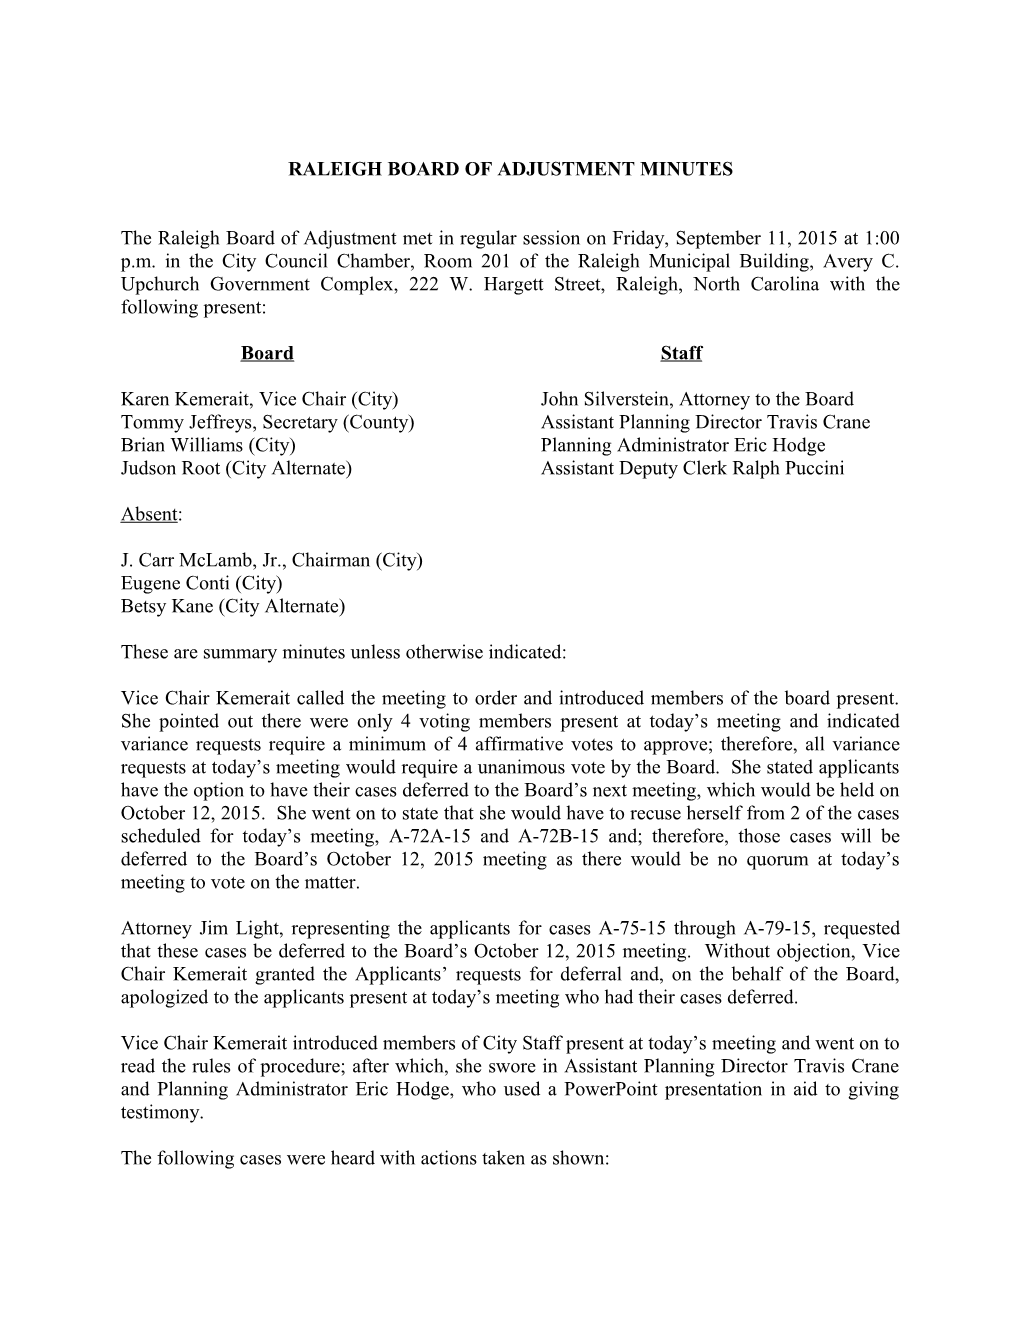 Raleigh Board of Adjustment Minutes - 09/11/2015